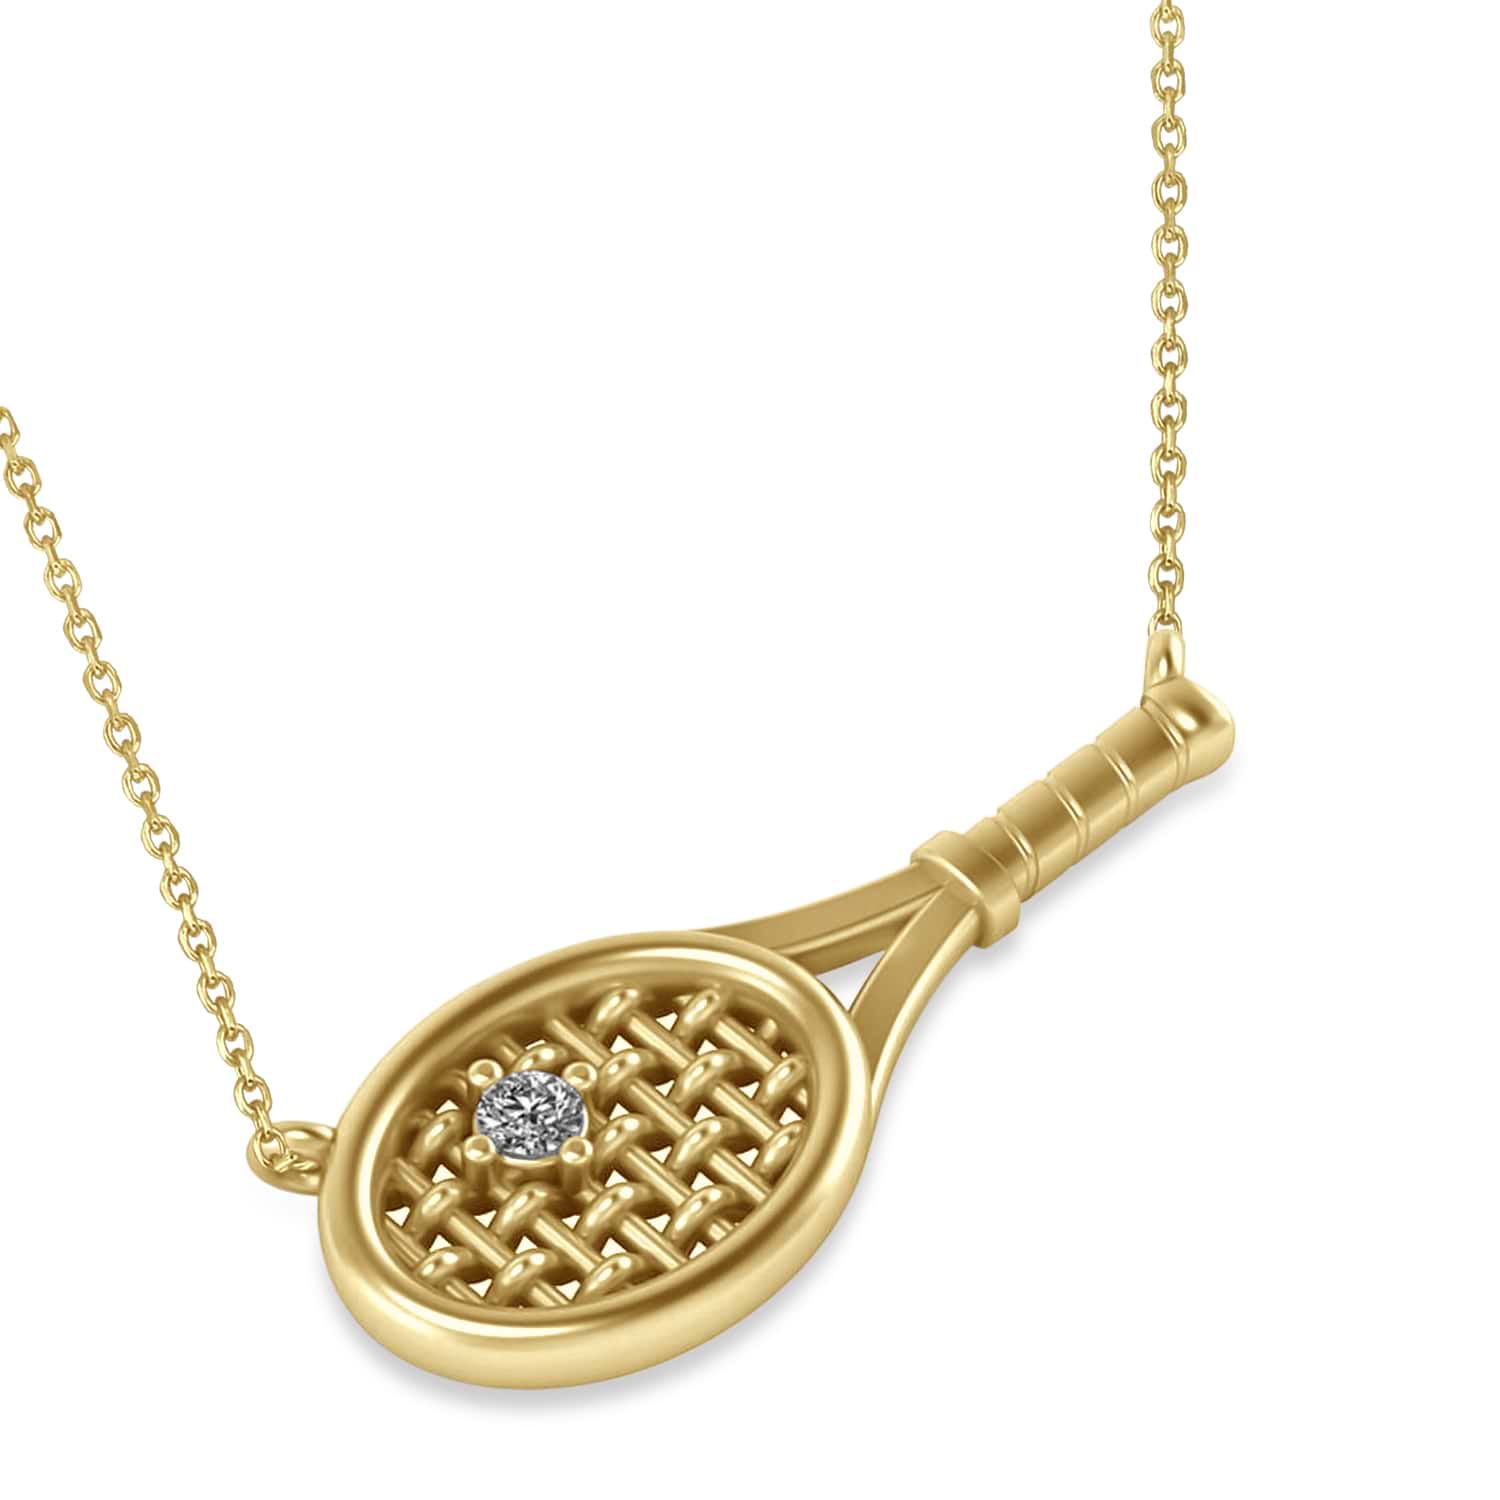 Sports Charms 14k Yellow Gold Tennis Racquet Pendant Necklace